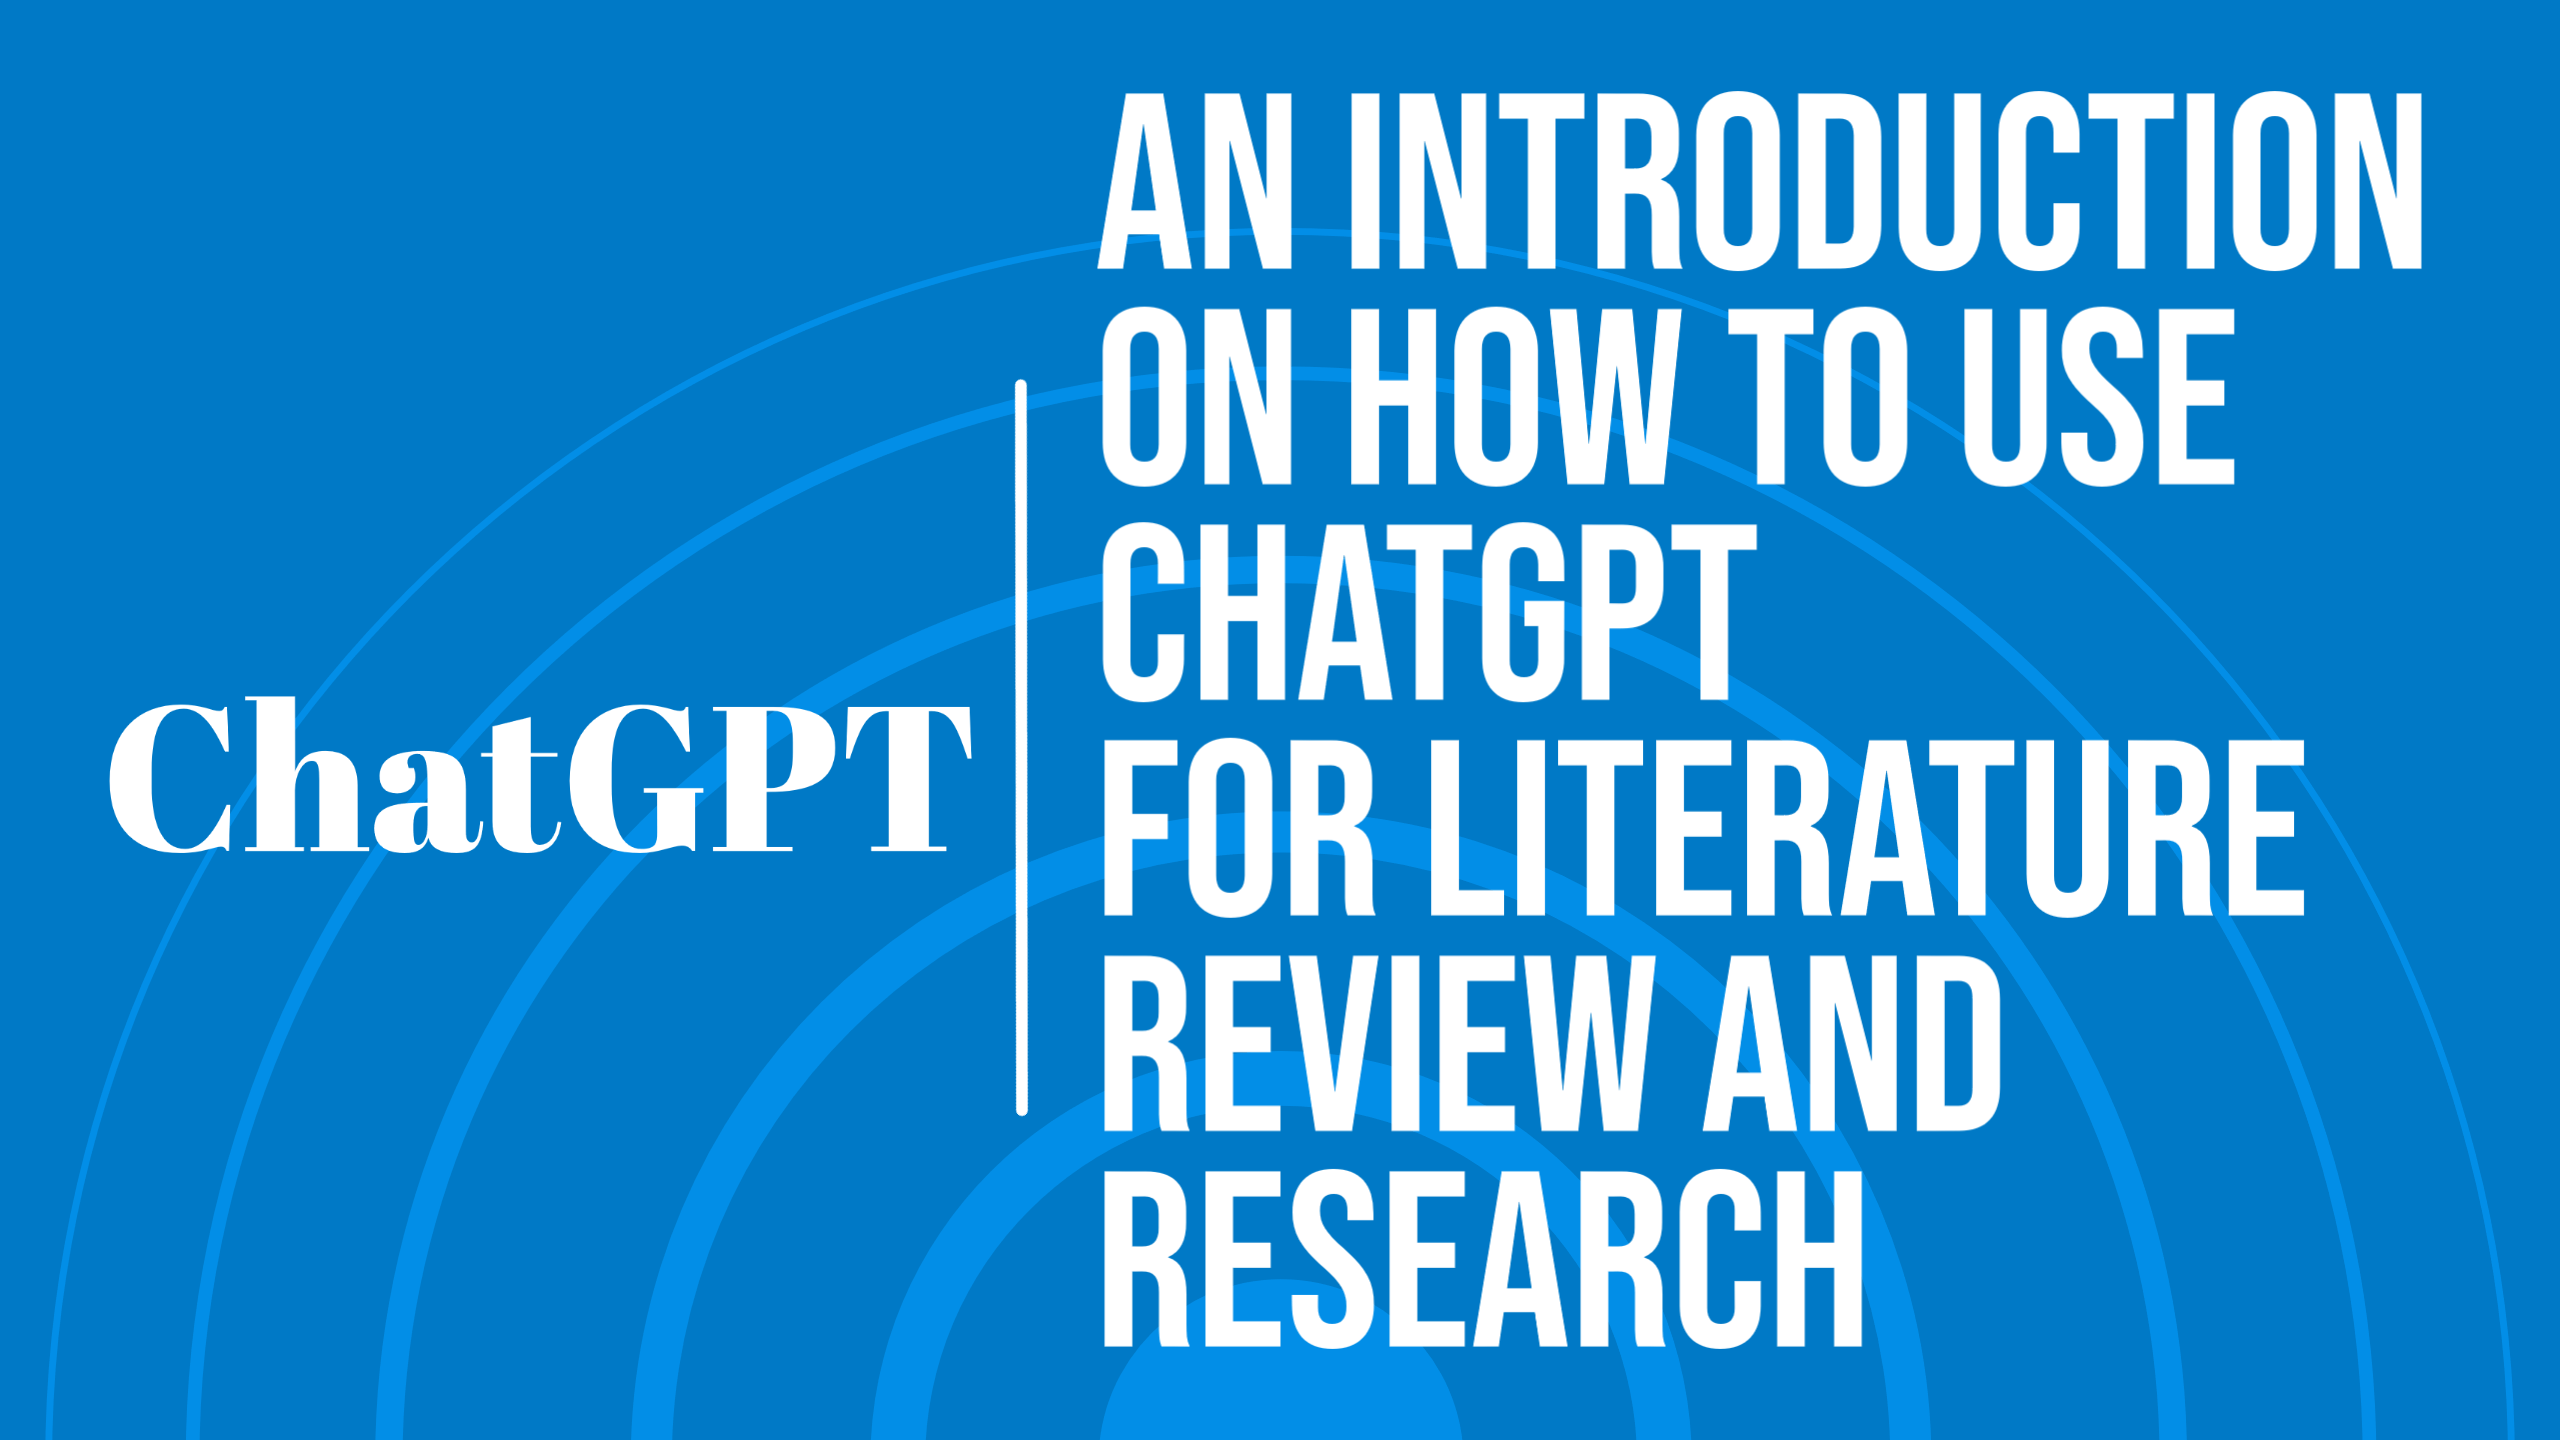 literature review using chatgpt